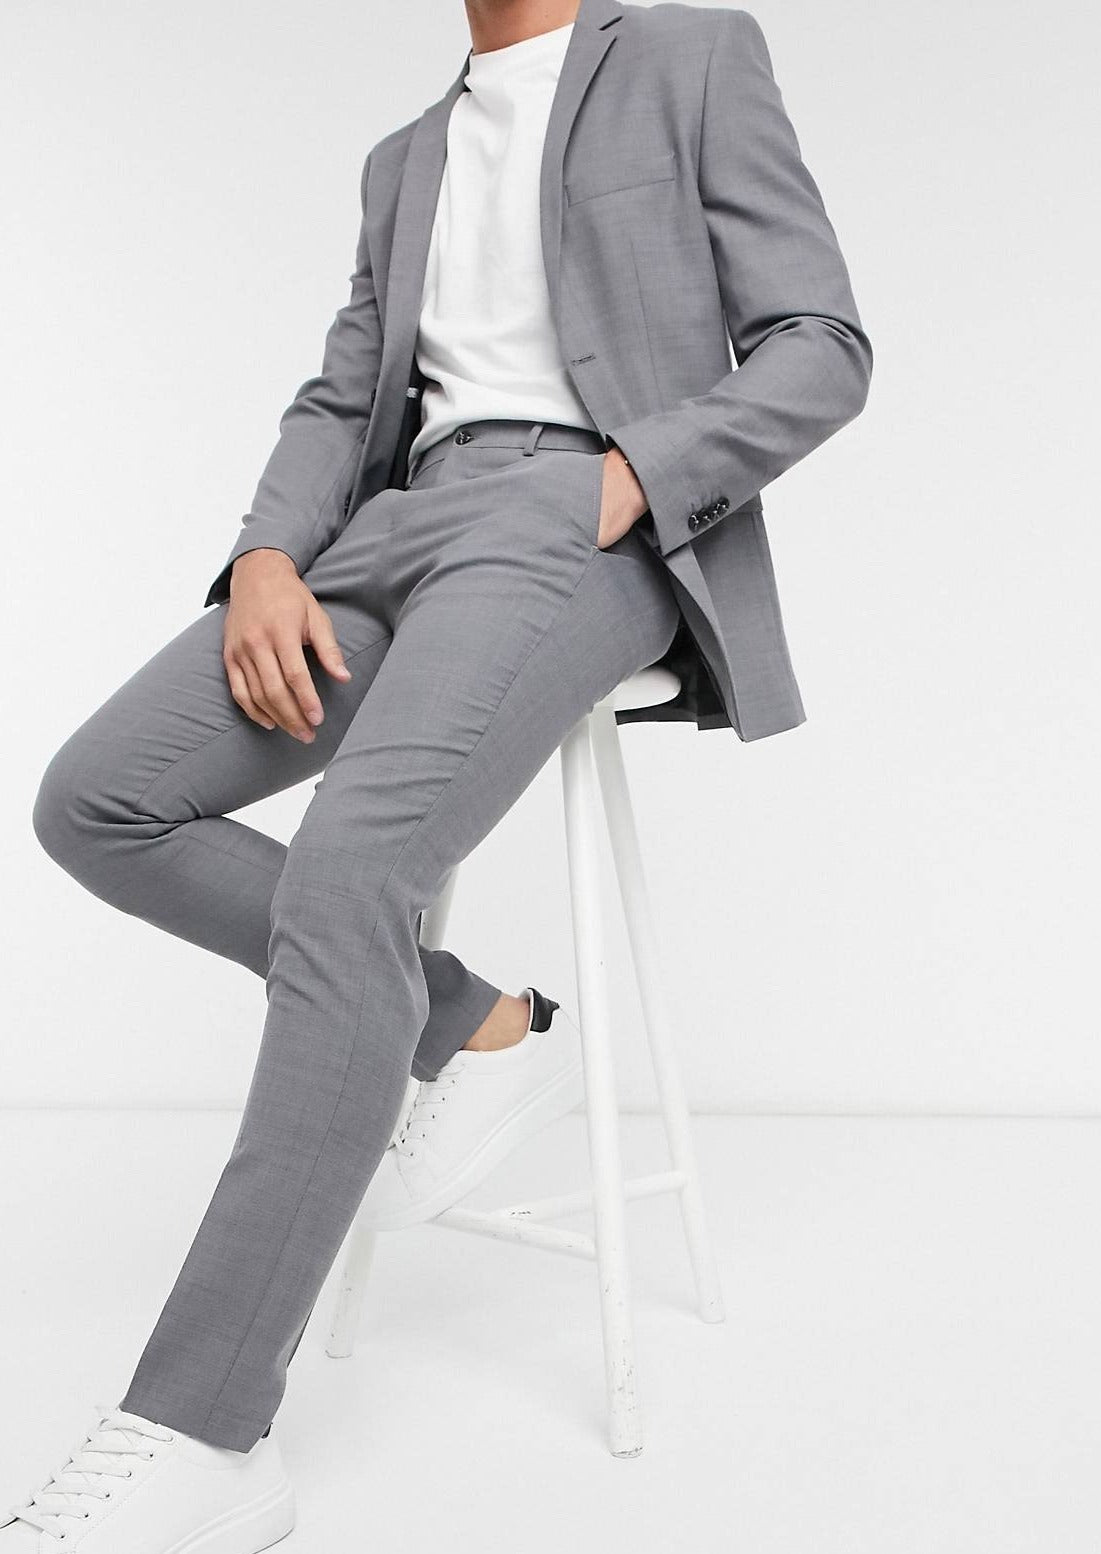 Only  Sons slim fit suit trouser in beige  ASOS